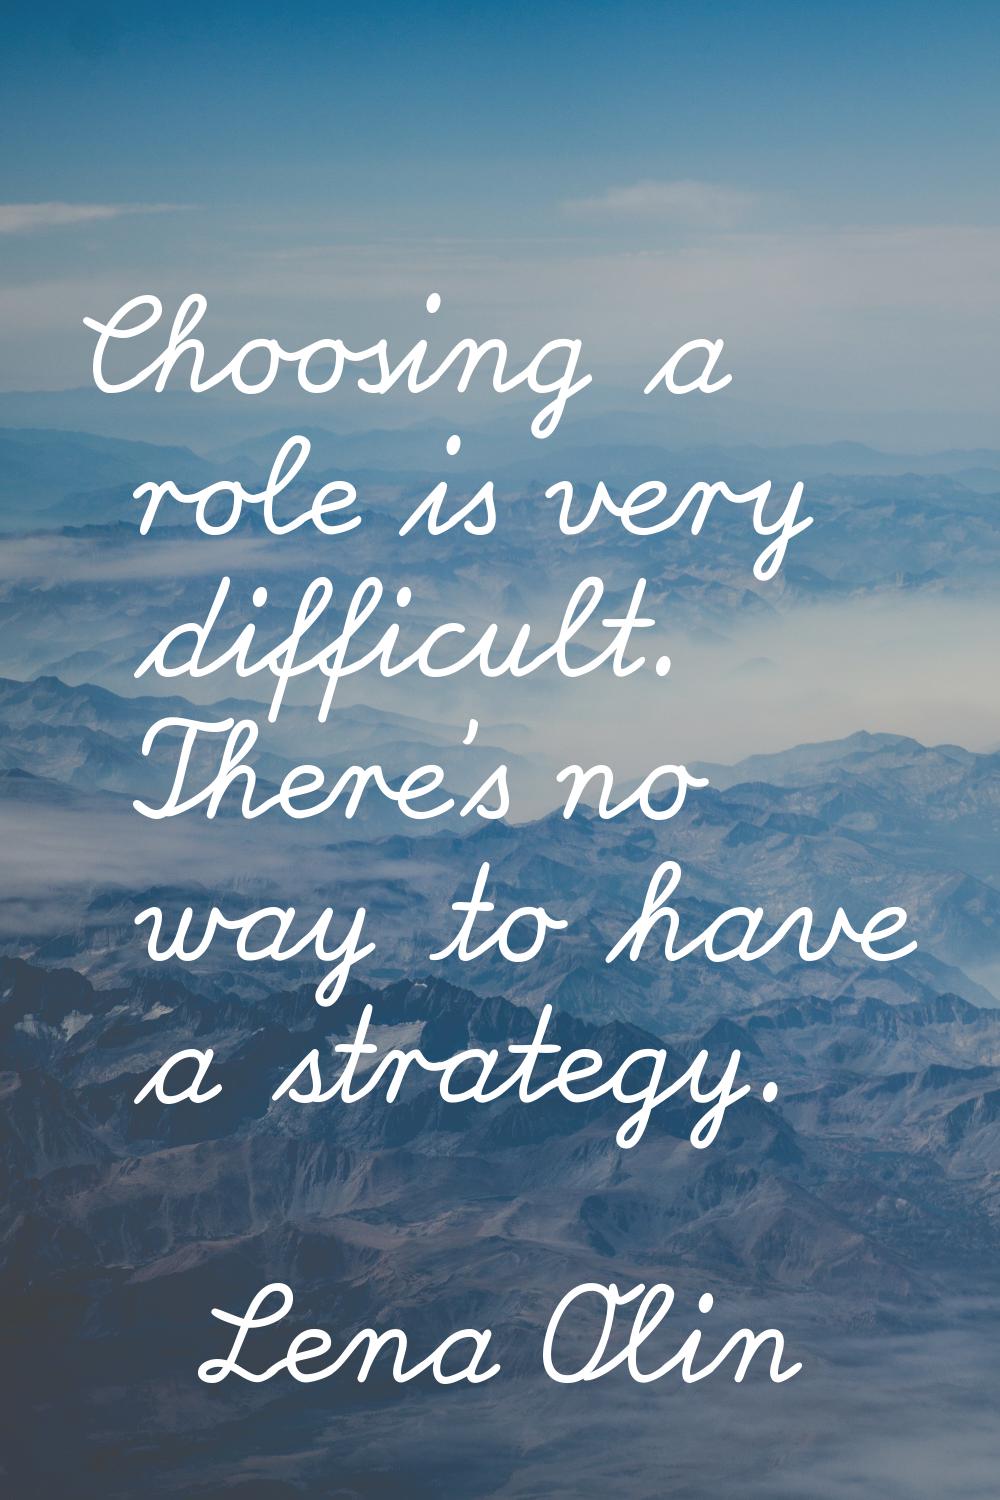 Choosing a role is very difficult. There's no way to have a strategy.